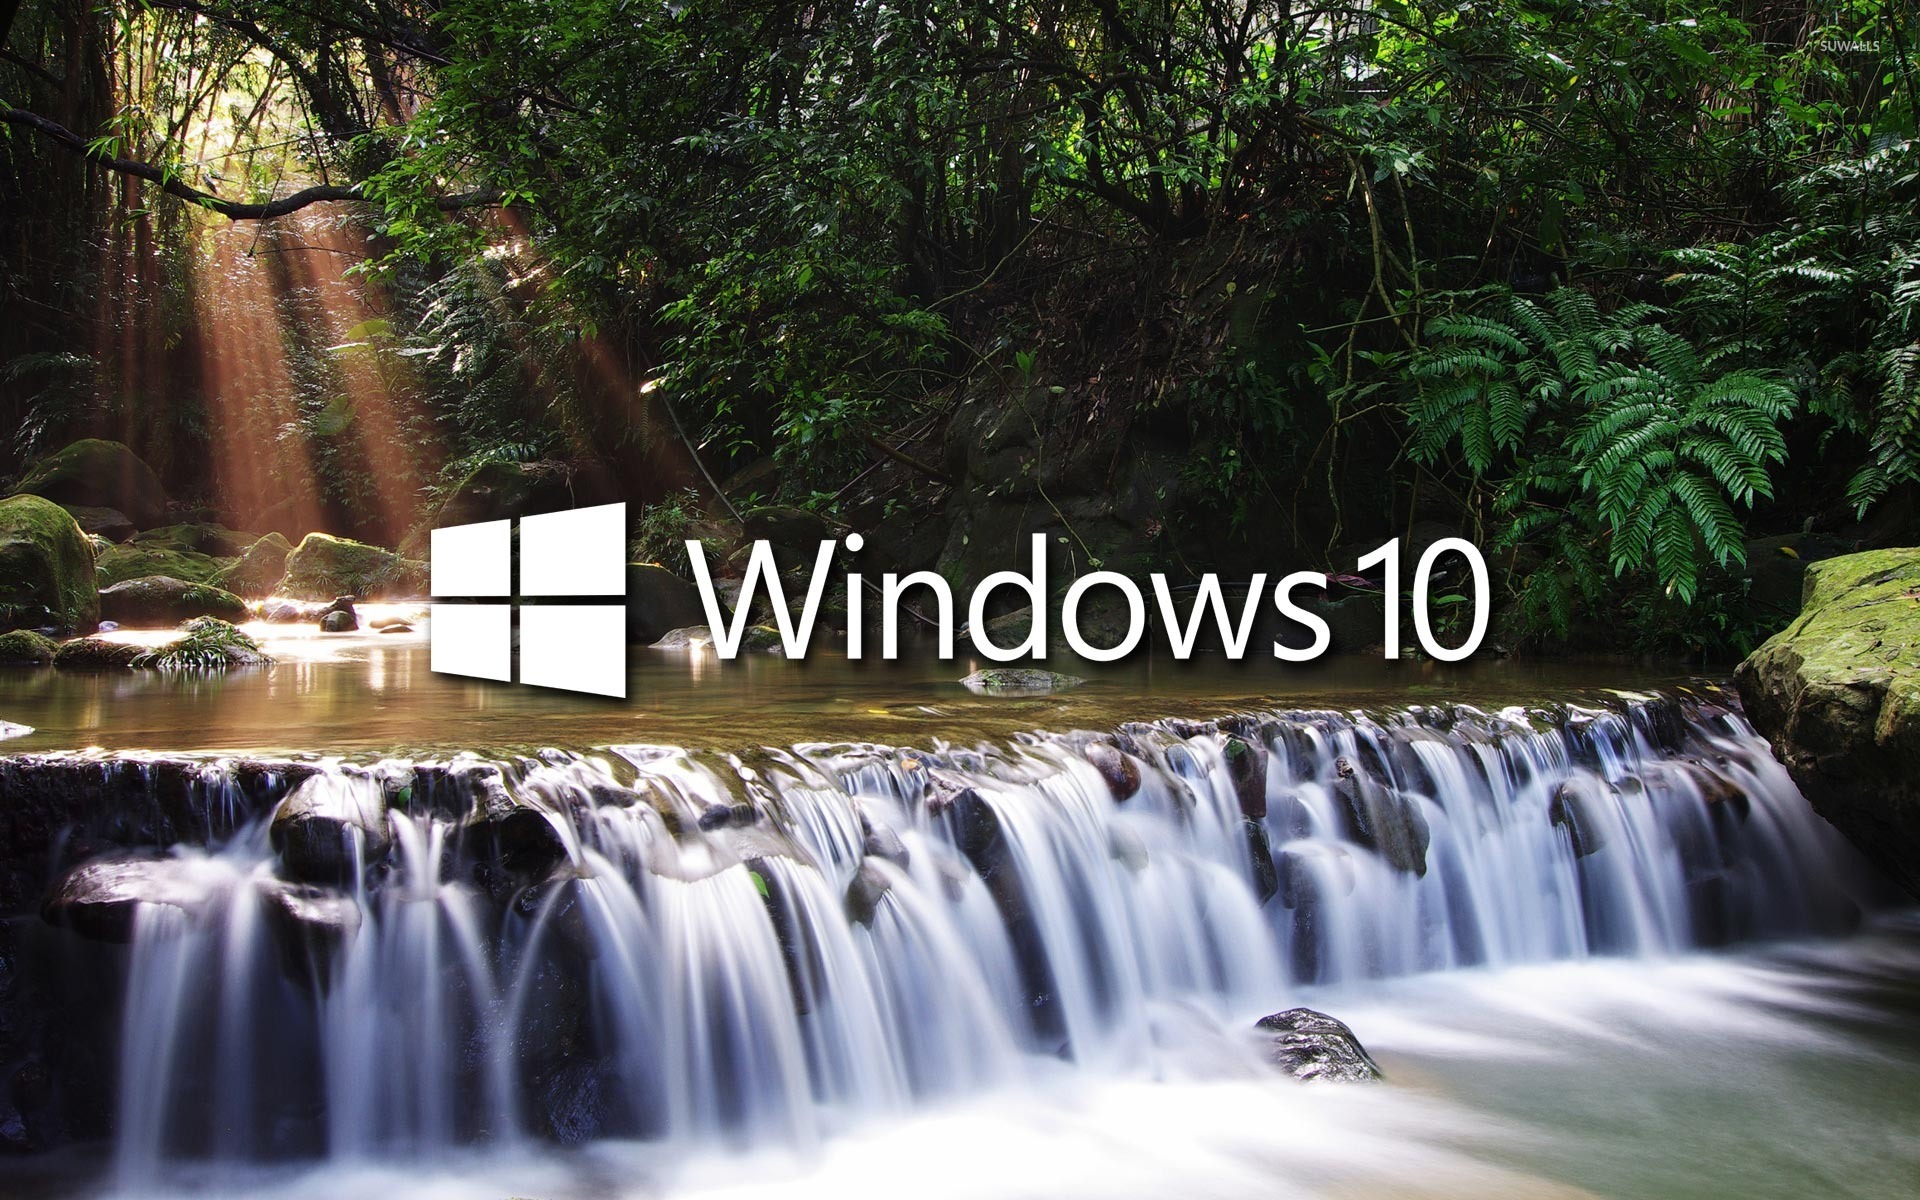 Windows 10 on a small waterfall wallpaper - Computer wallpapers - #47604